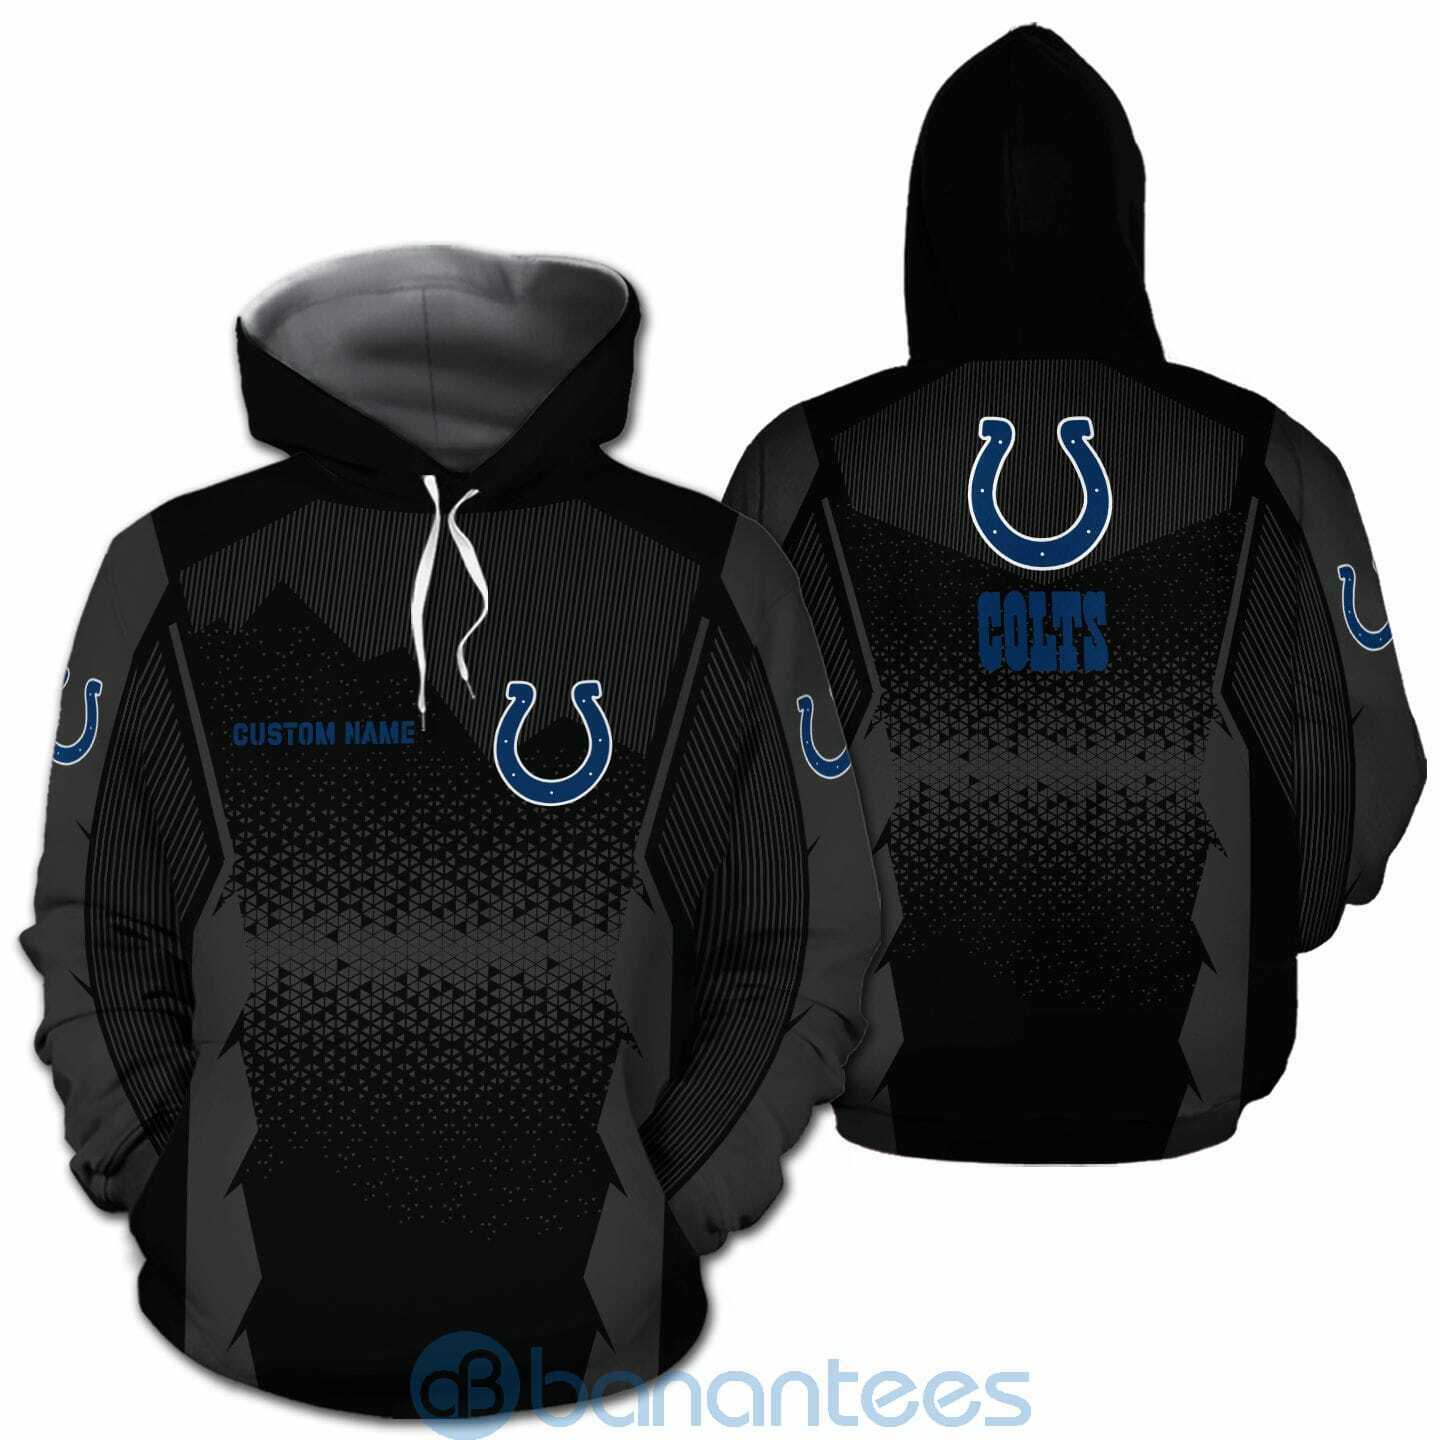 Indianapolis Colts NFL Football Team Custom Name 3D All Over Printed Shirt